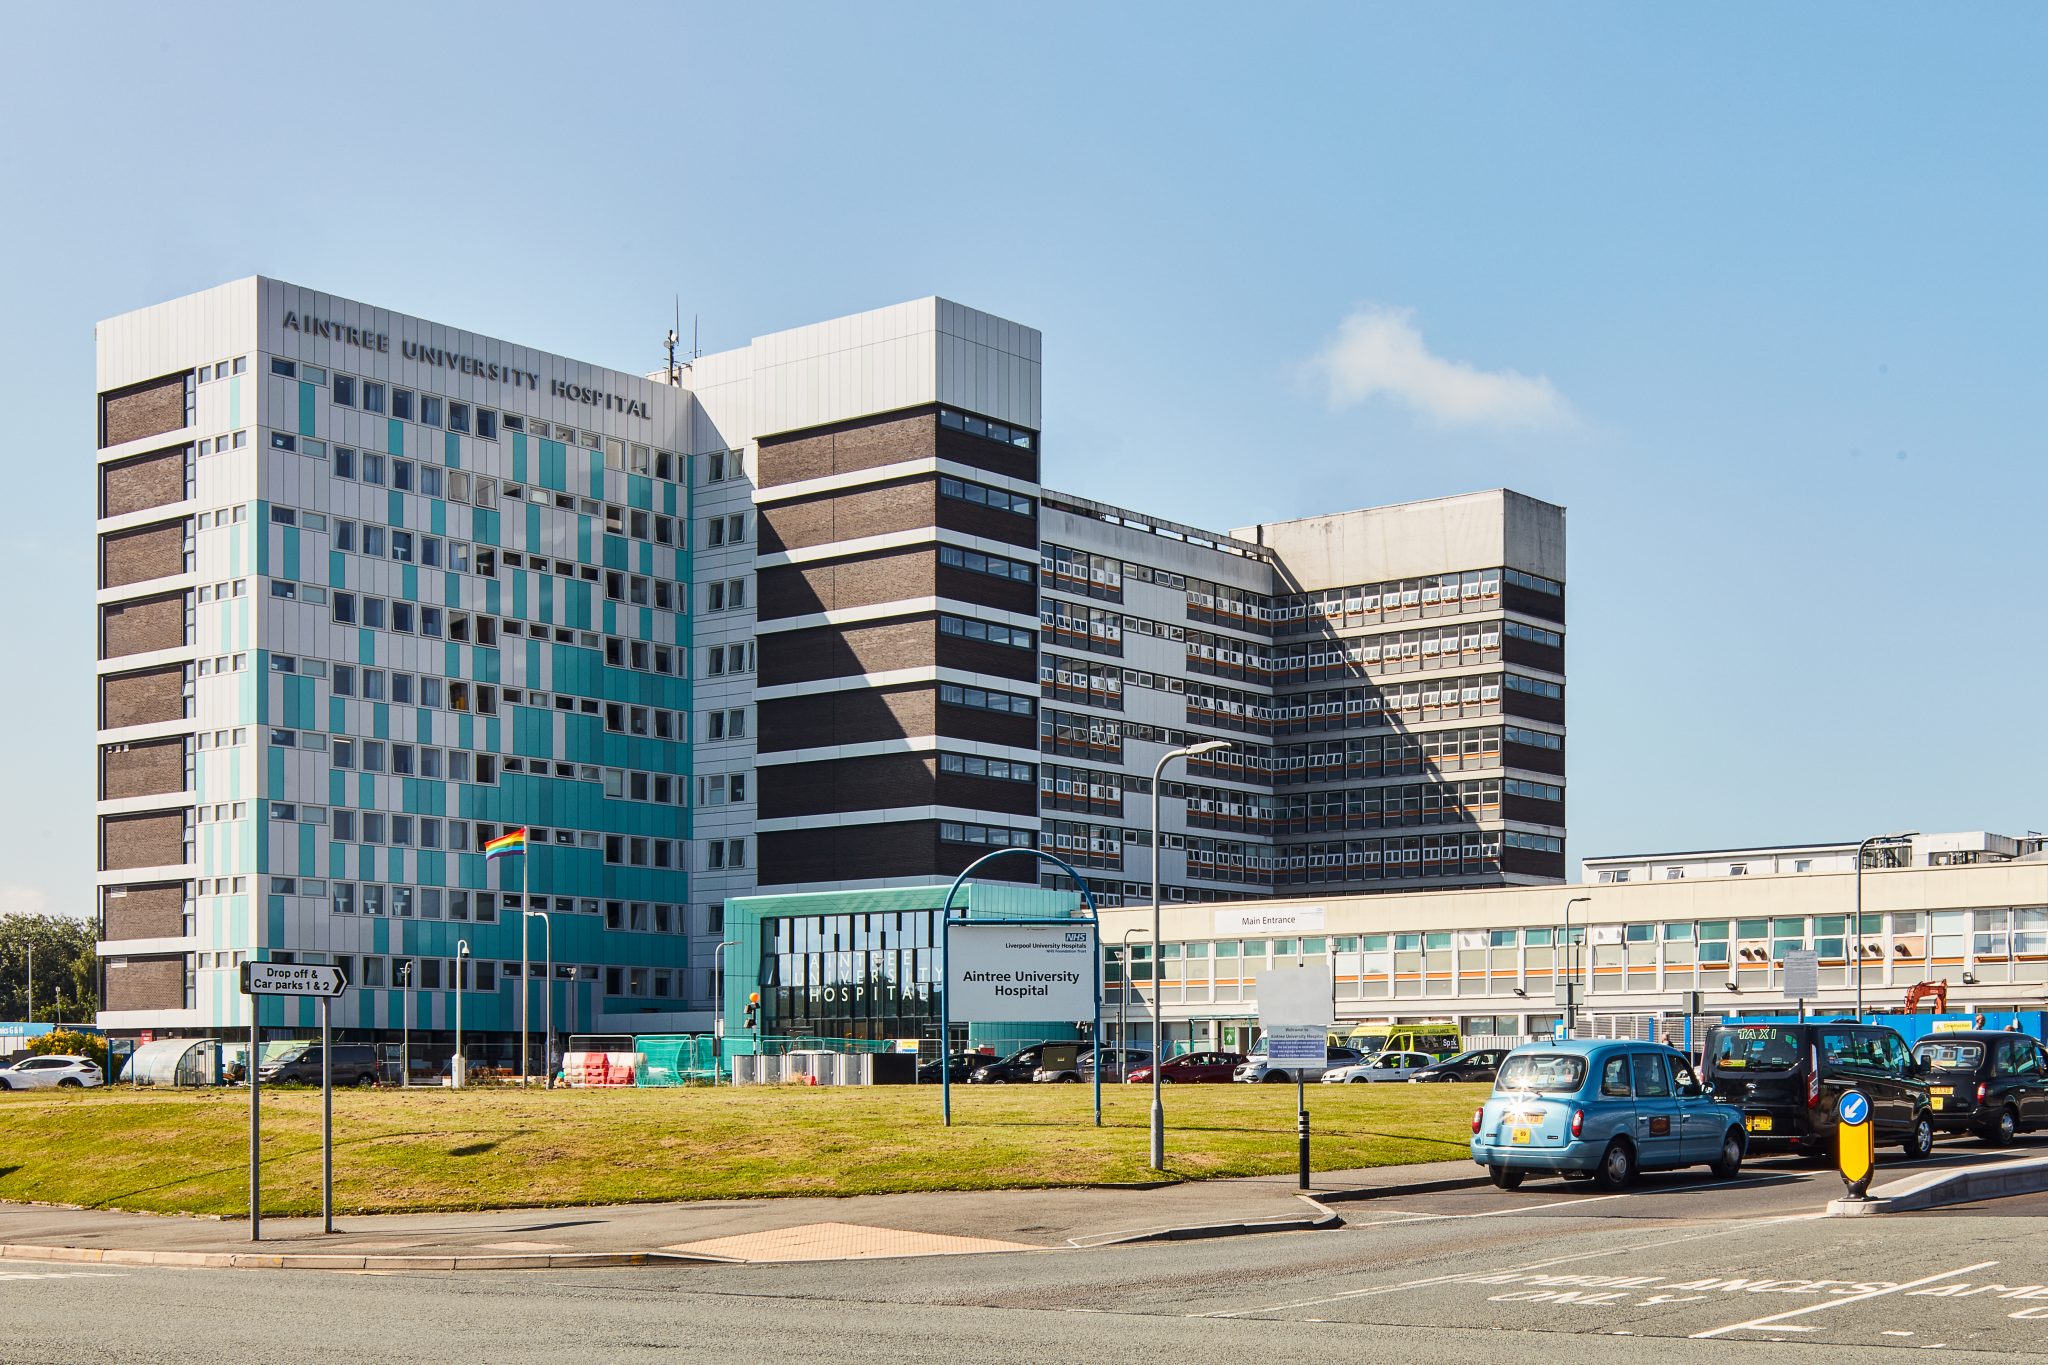 Aintree Hospital, Liverpool - Day Architectural Ltd